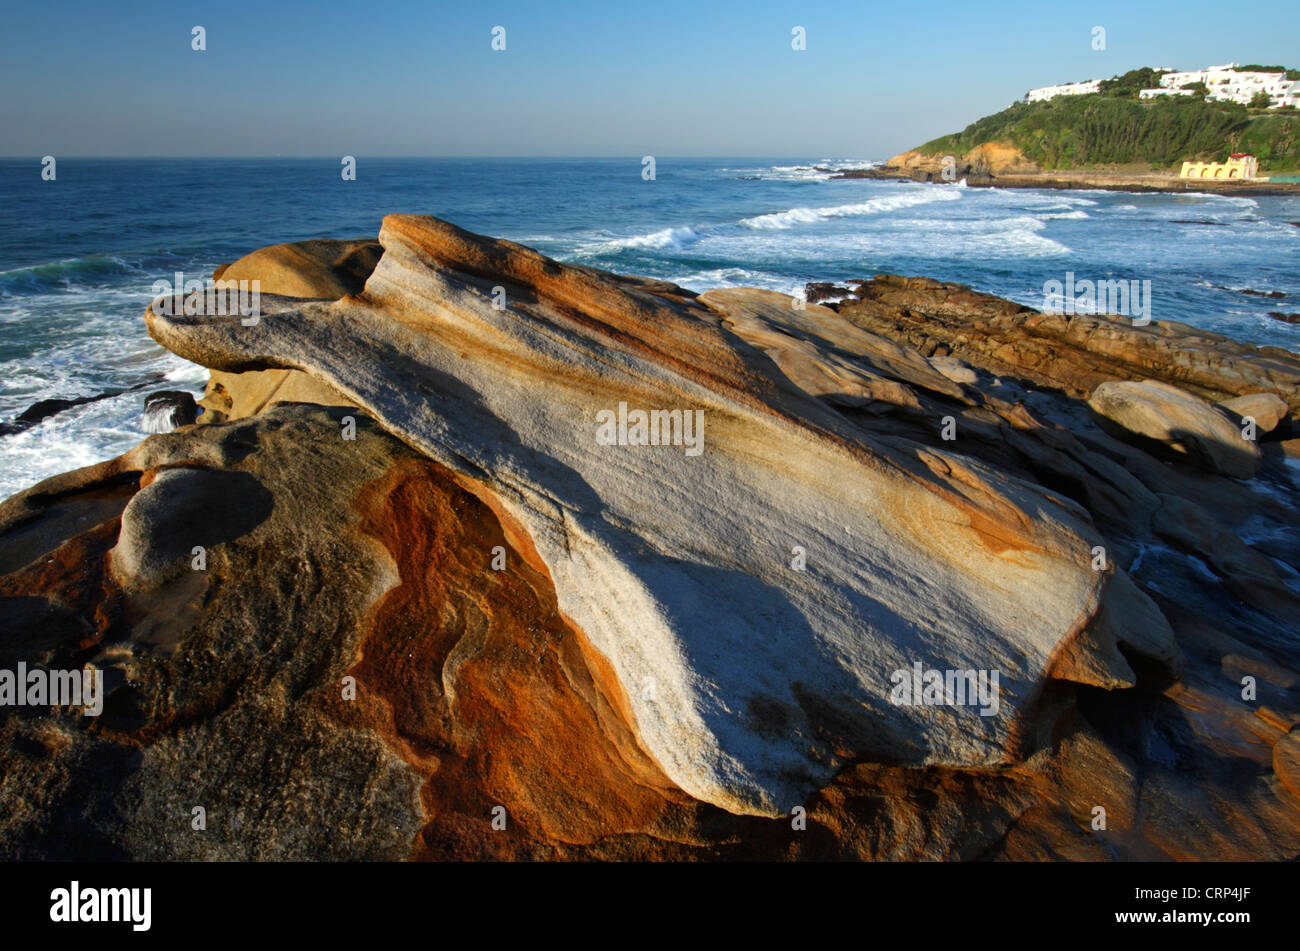 Sandstone cliffs overlooking the sea at Thompson's Bay, Ballito, Kwazulu Natal, South Africa Stock Photo